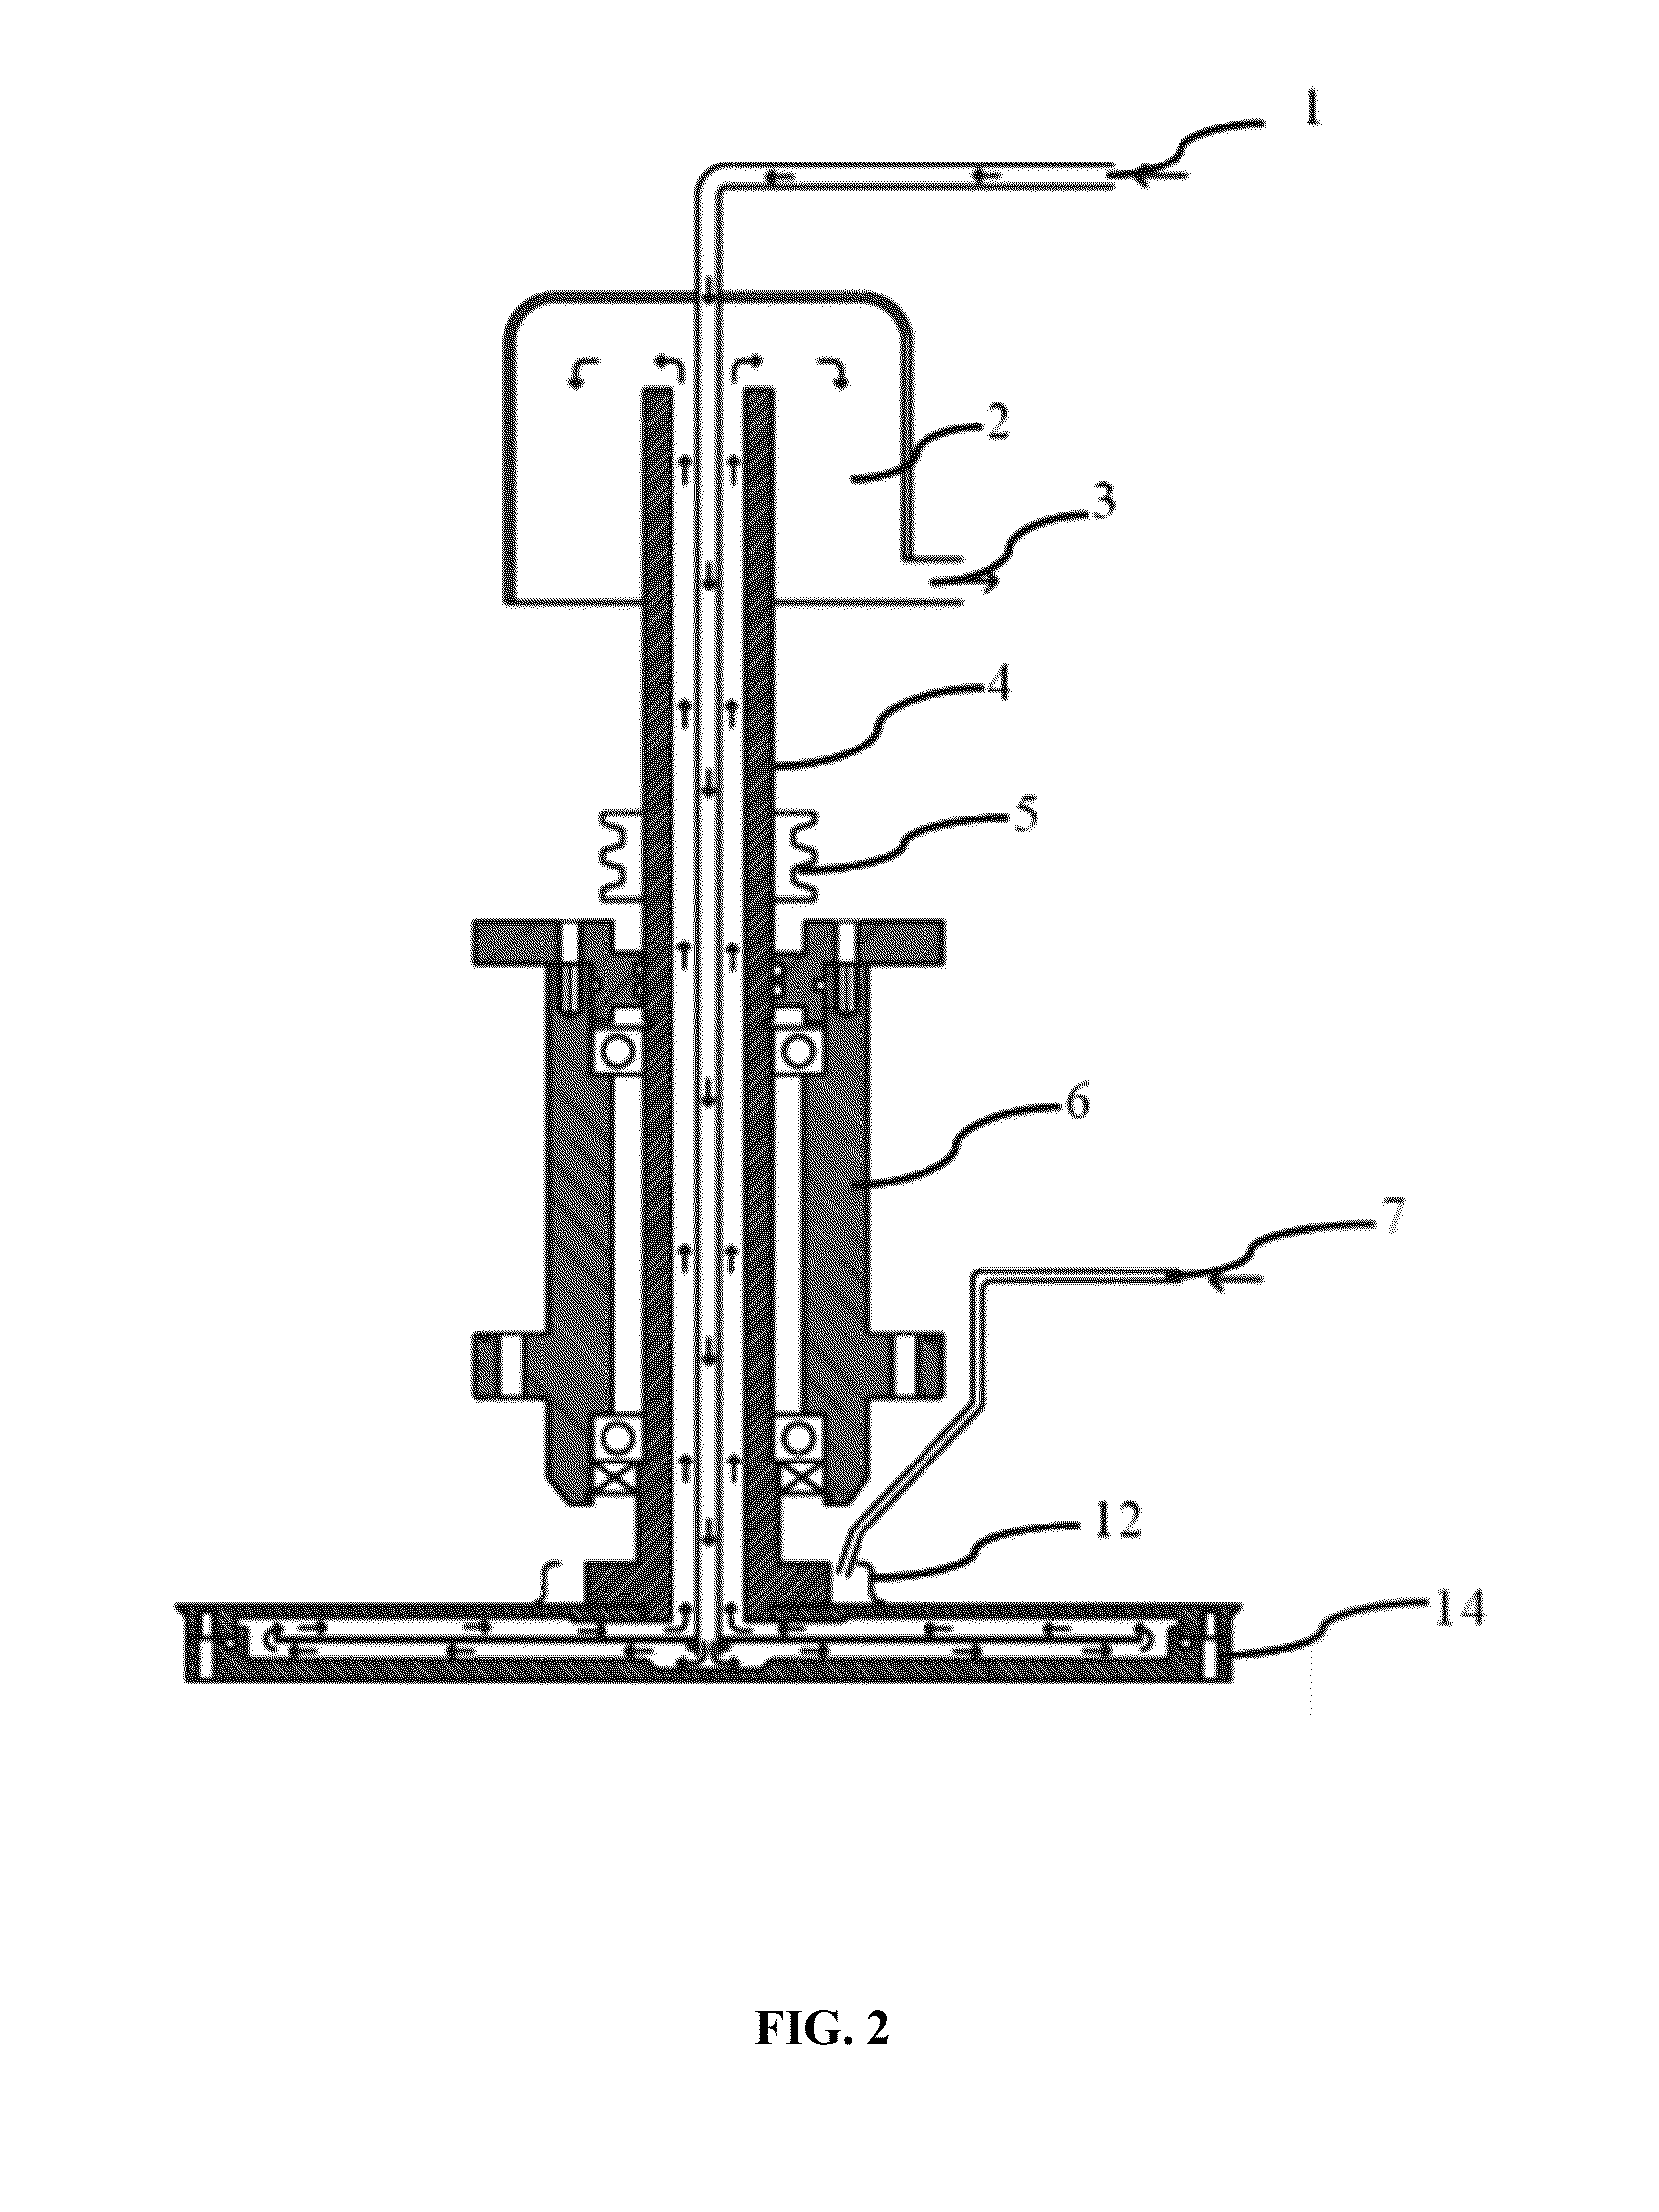 Method and system for enhancing polymerization and nanoparticle production